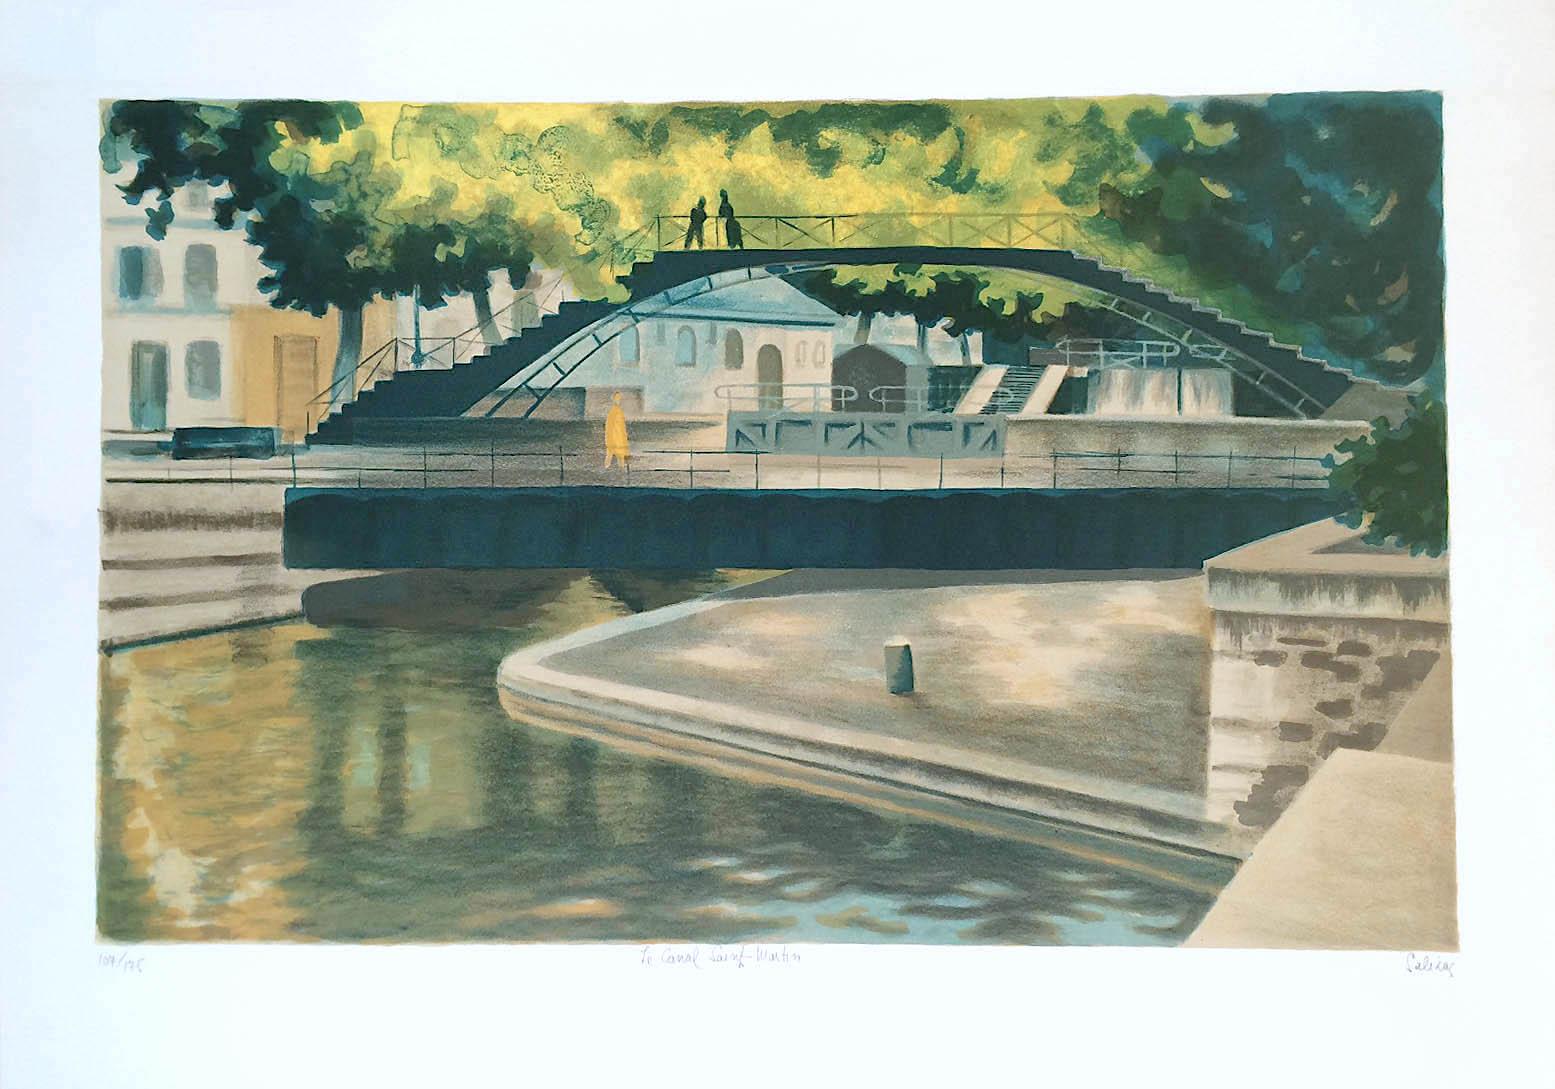 CANAL SAINT-MARTIN, Hand Drawn Lithograph, French Landscape Historic Paris Canal - Print by Laurent Marcel Salinas